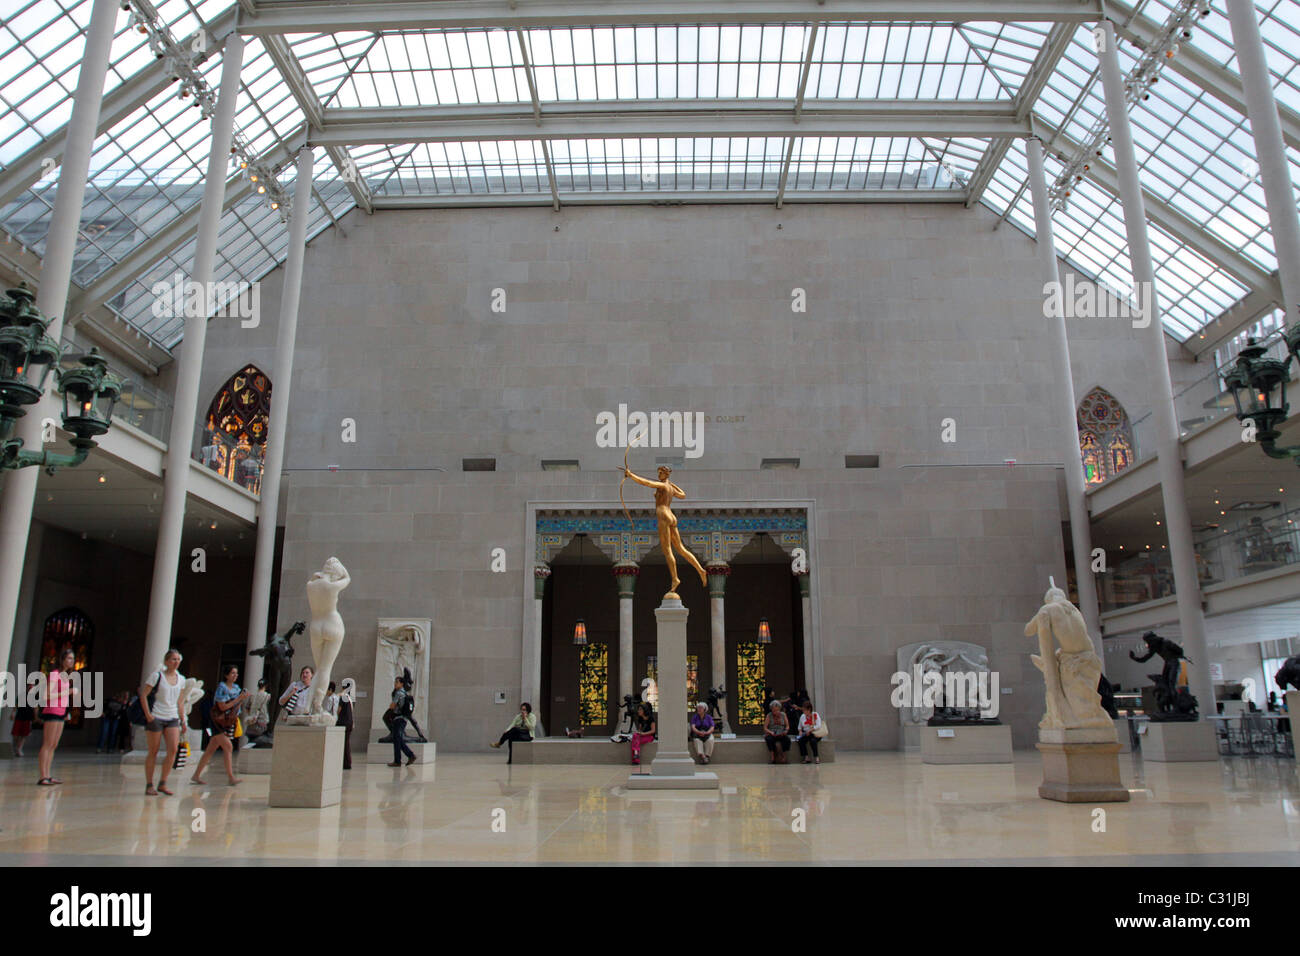 EXHIBITION HALL IN THE METROPOLITAN MUSEUM OF ART, MANHATTAN, NEW YORK CITY, NEW YORK STATE, UNITED STATES Stock Photo